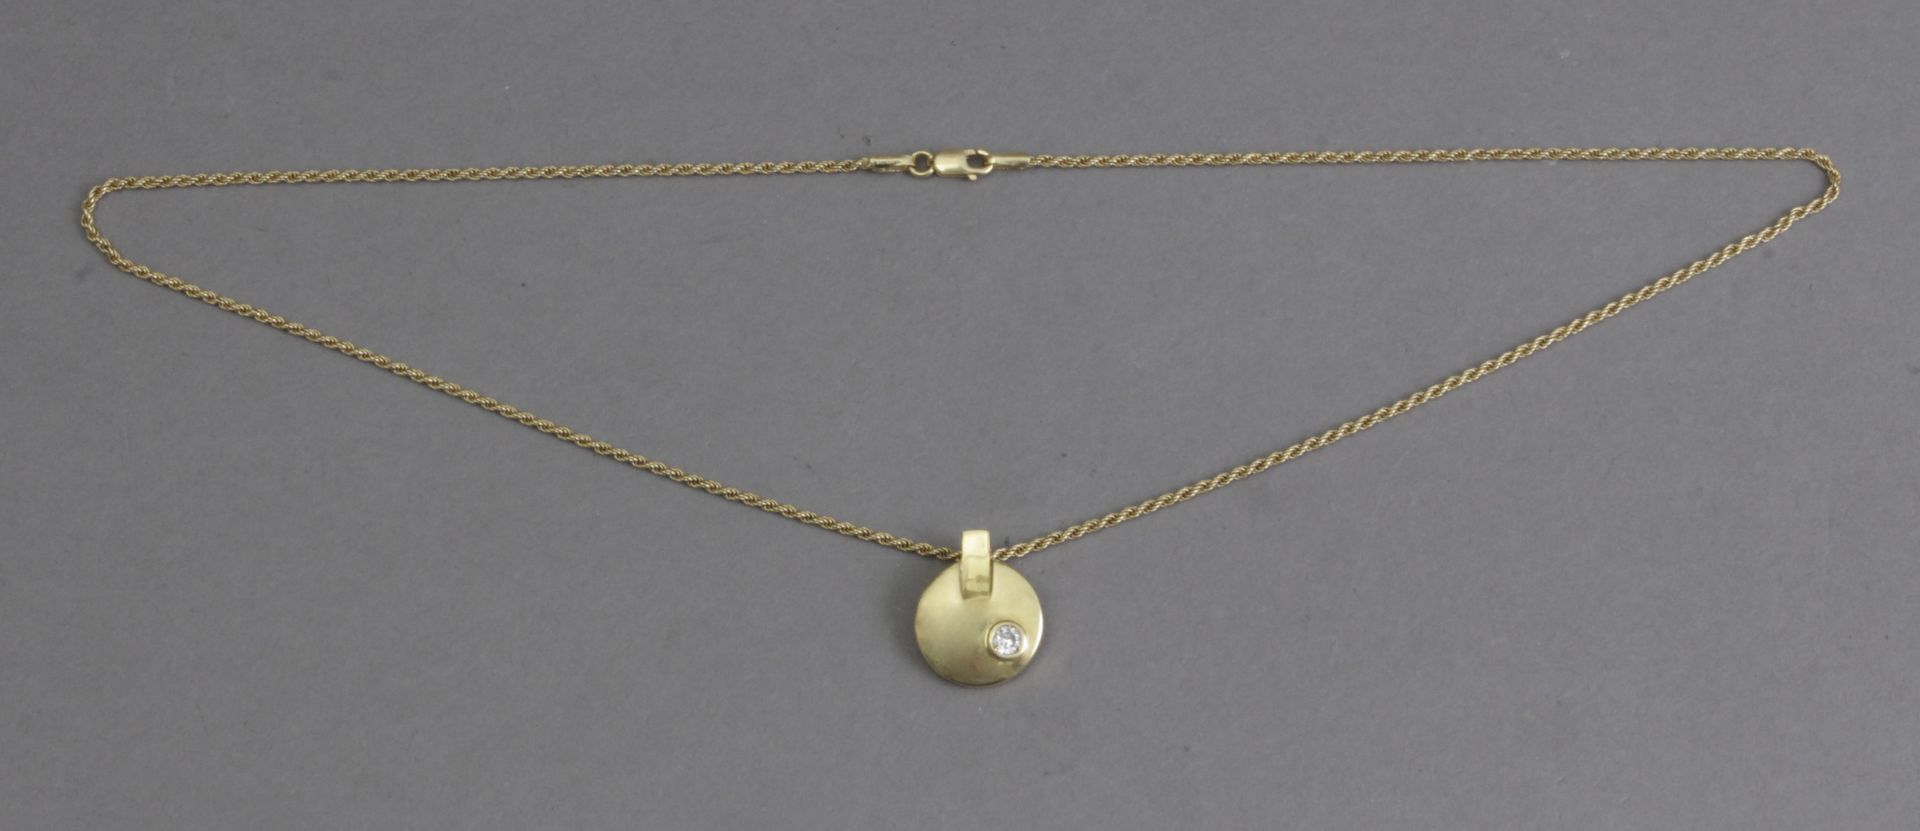 An 18k. yellow gold and brilliant cut diamond pendant and chain - Image 3 of 4